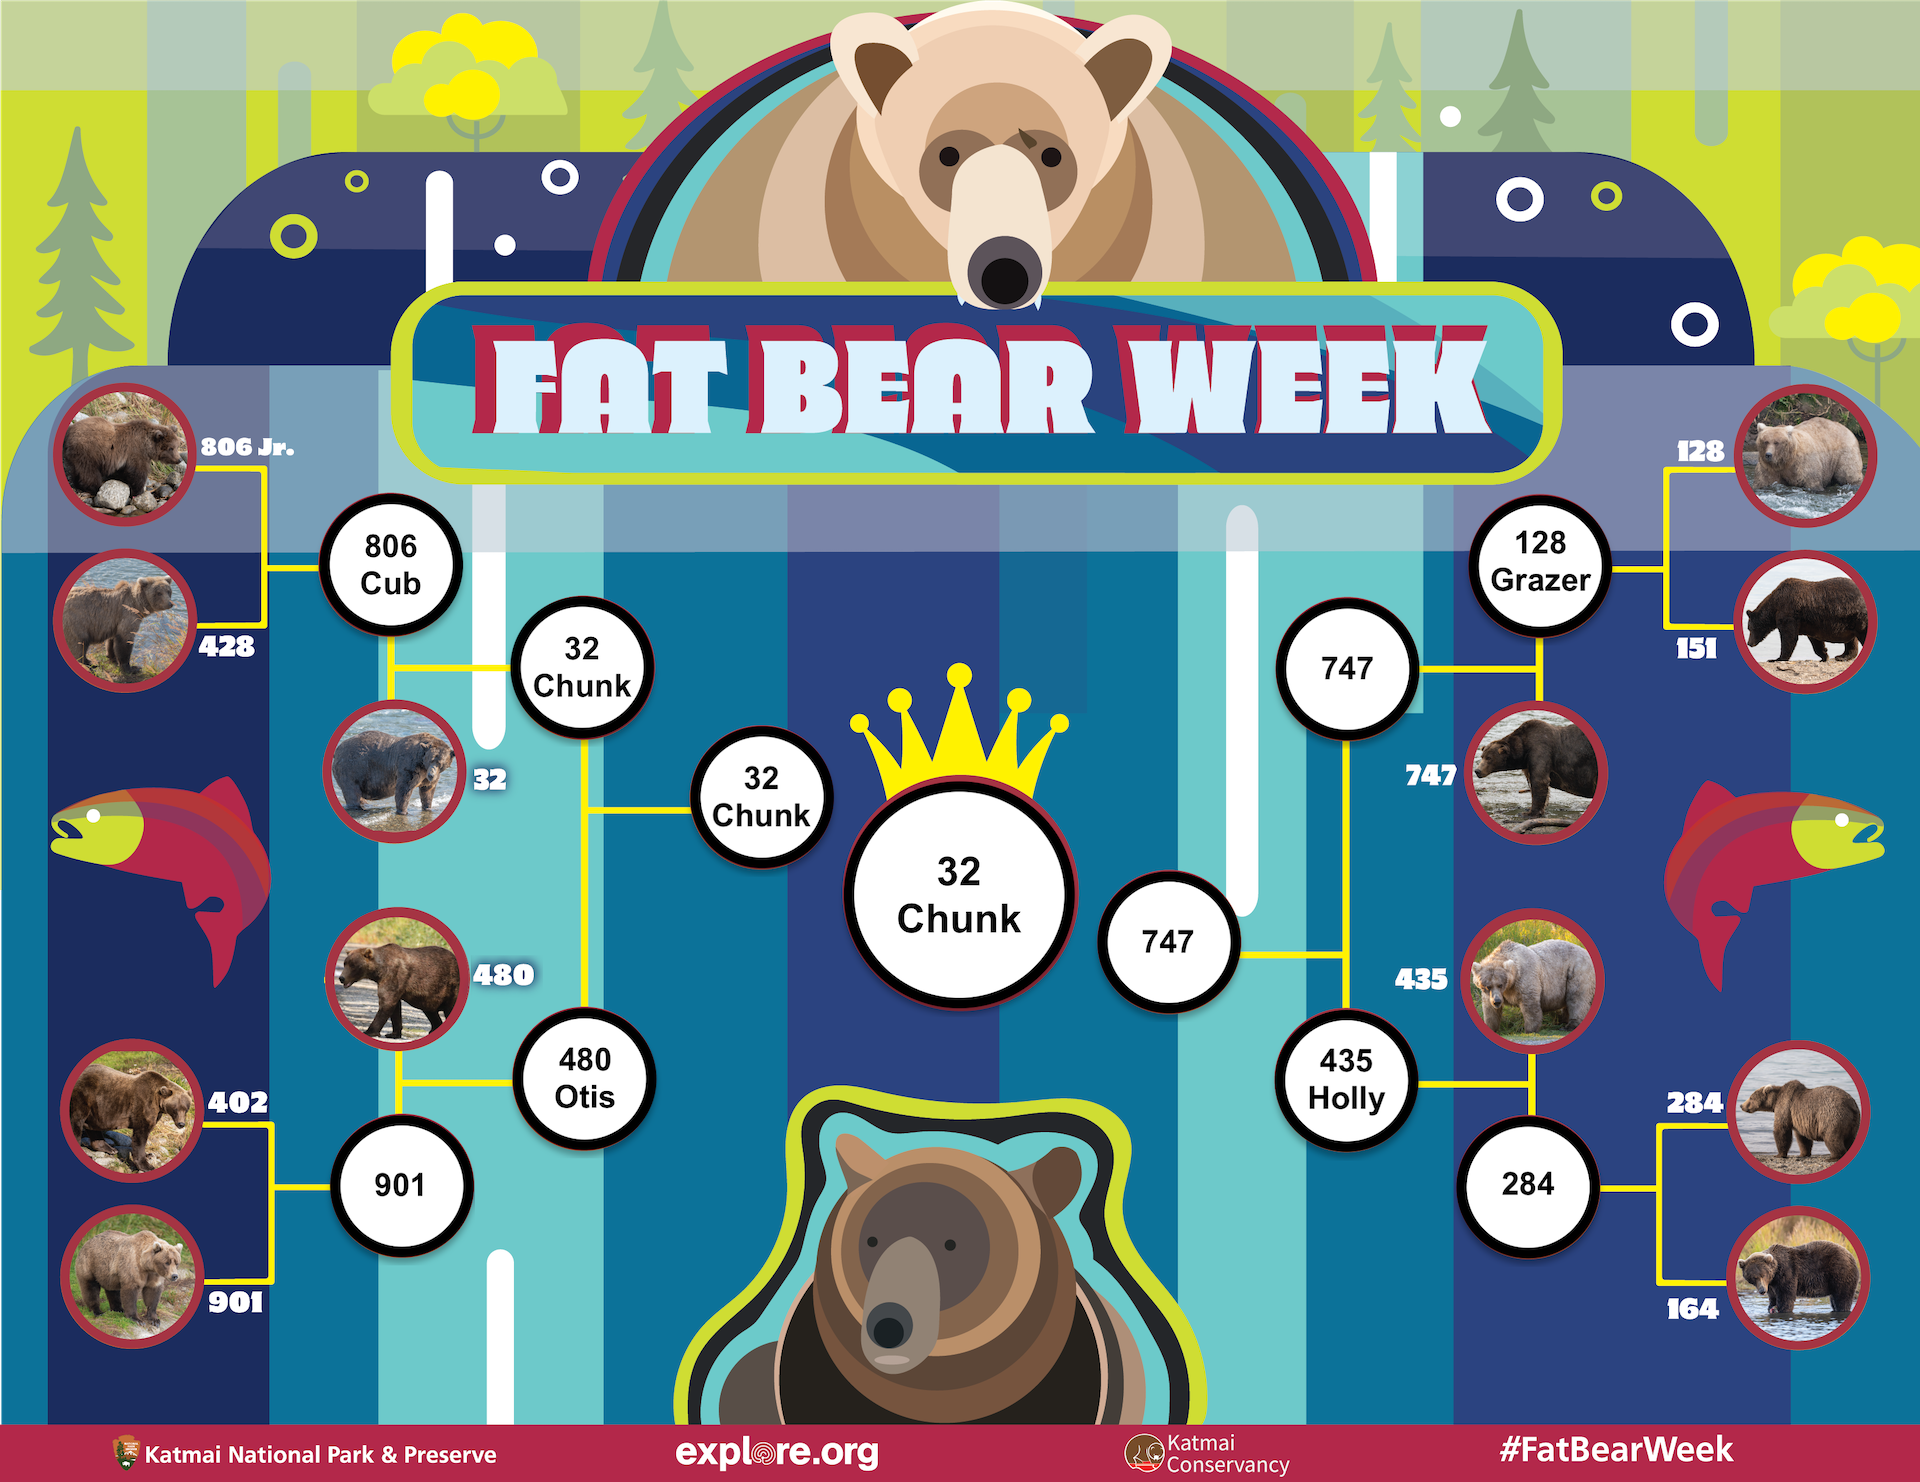 Fat Bear Week bracket. Four bears (806 cub vs 428; 402 vs 901) in two first round matches on left. Two bears (32 and 480) are in bye round on left. Four bears (128 Grazer vs 151; 284 vs 164) in two first round matches on right. Two bears (747 and 435) are in bye round on right. Graphical cartoon bears fill the top and bottom center of the bracket.